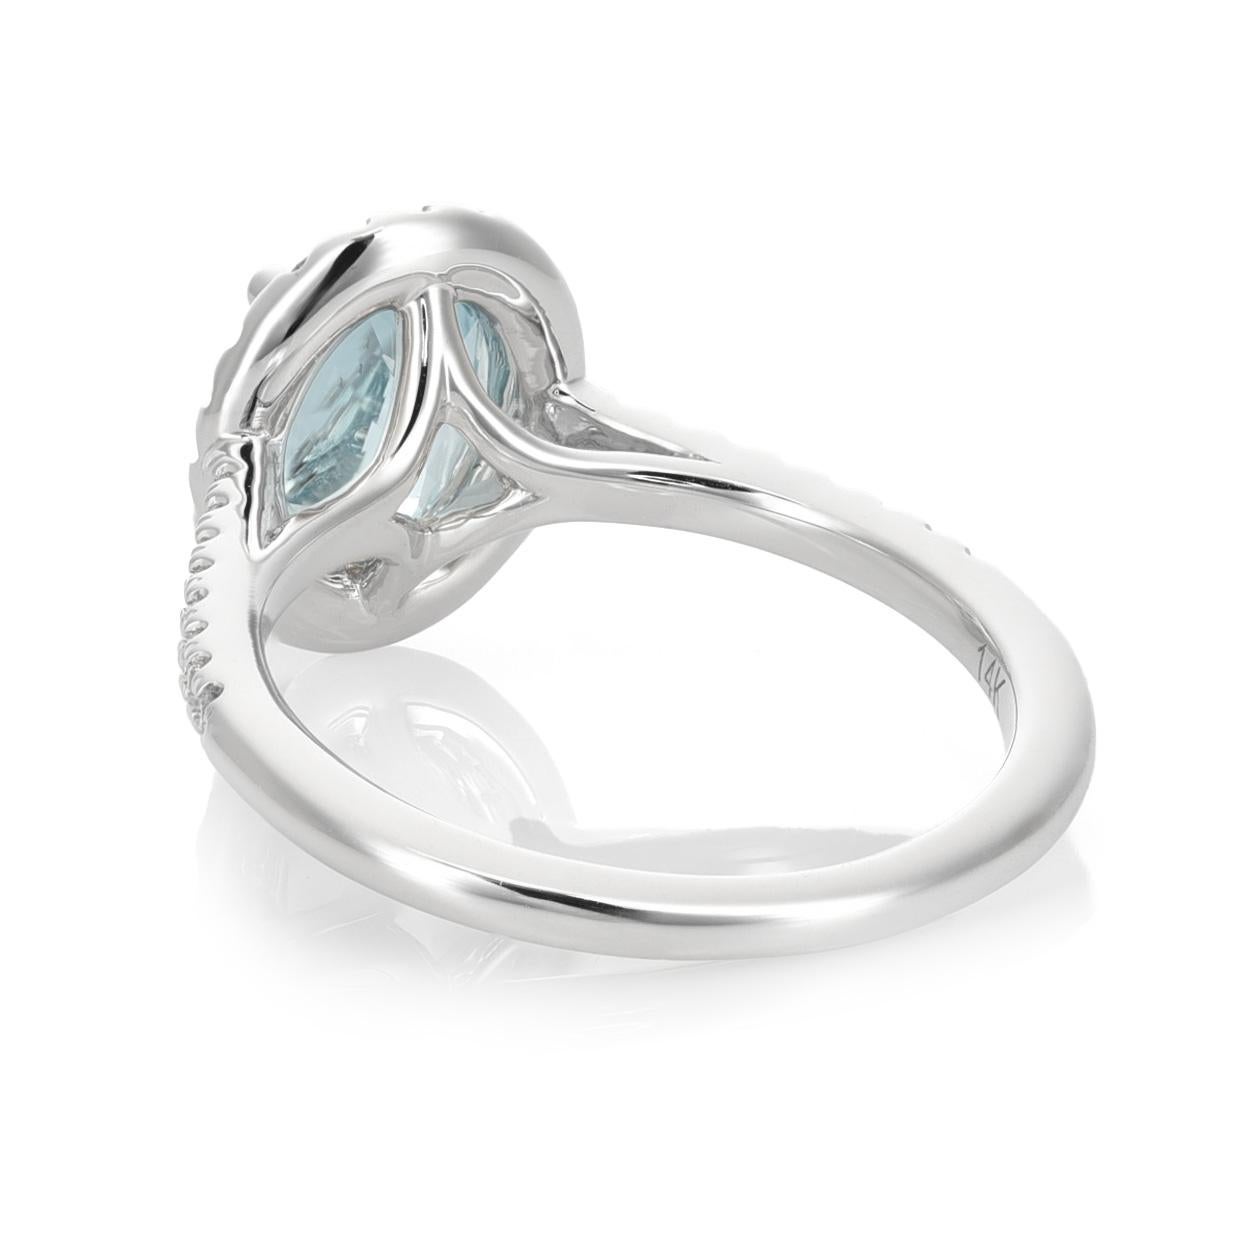 Mixed Cut 1.12 Carats Natural Aquamarine Diamonds set in 14K White Gold Ring For Sale